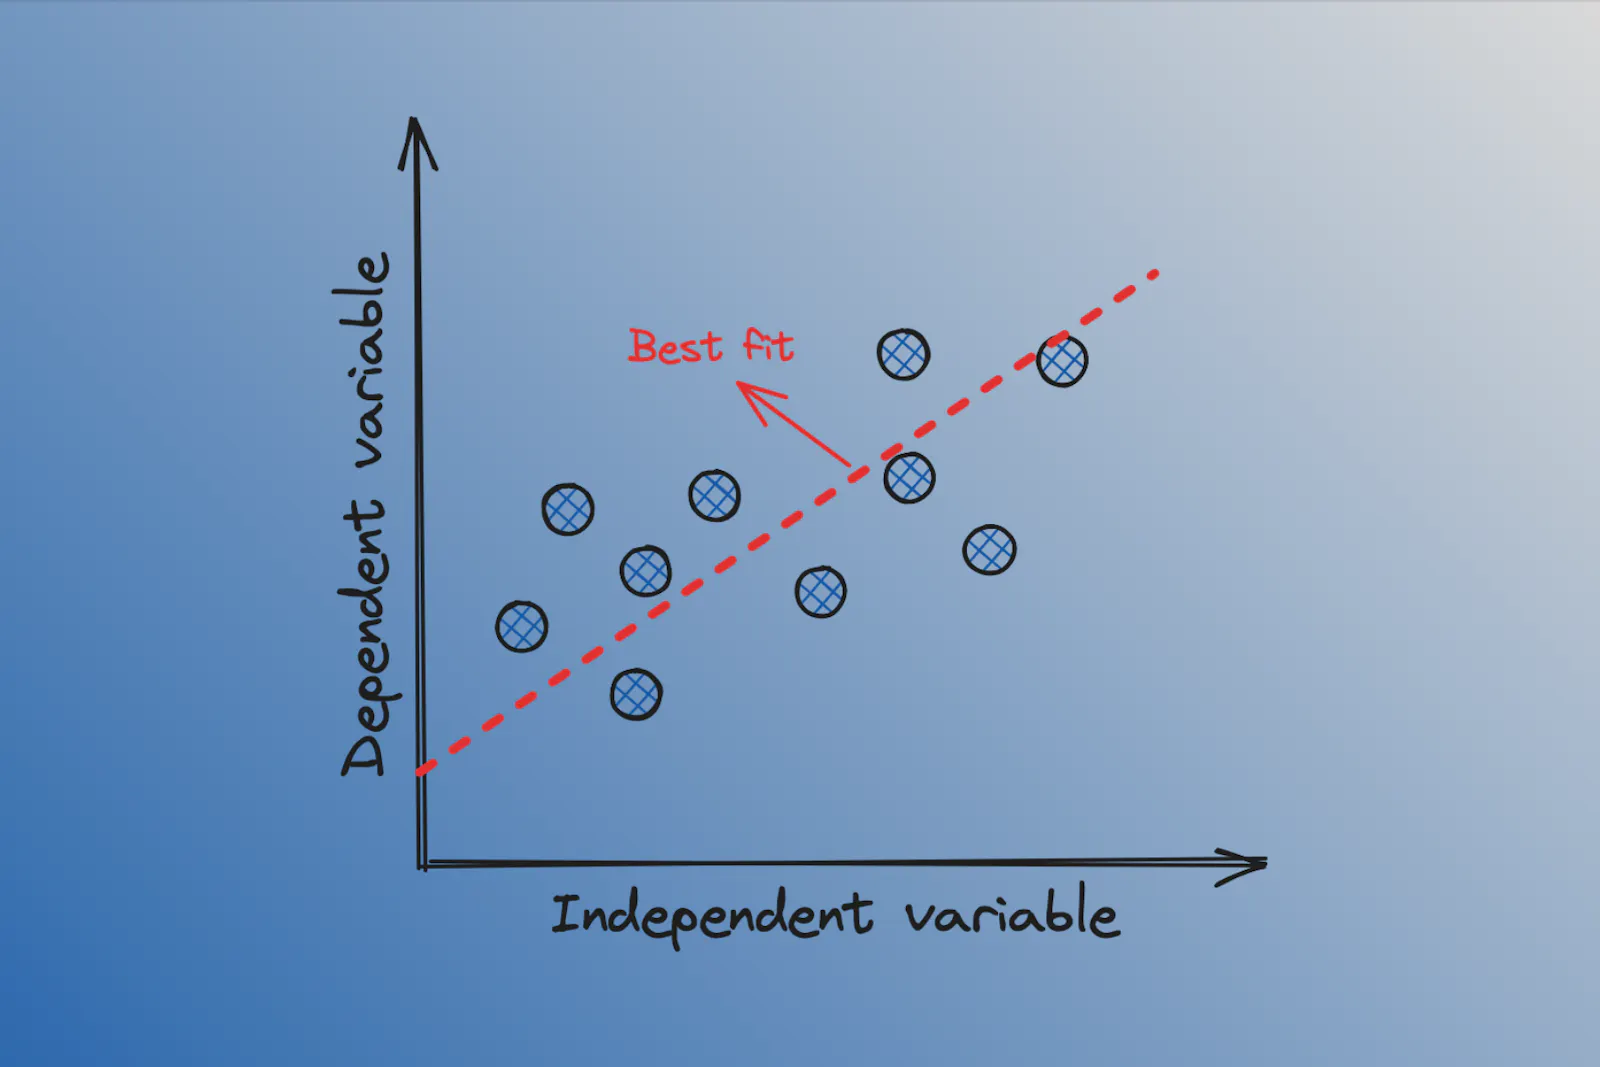 Linear Regression (Image by authors)